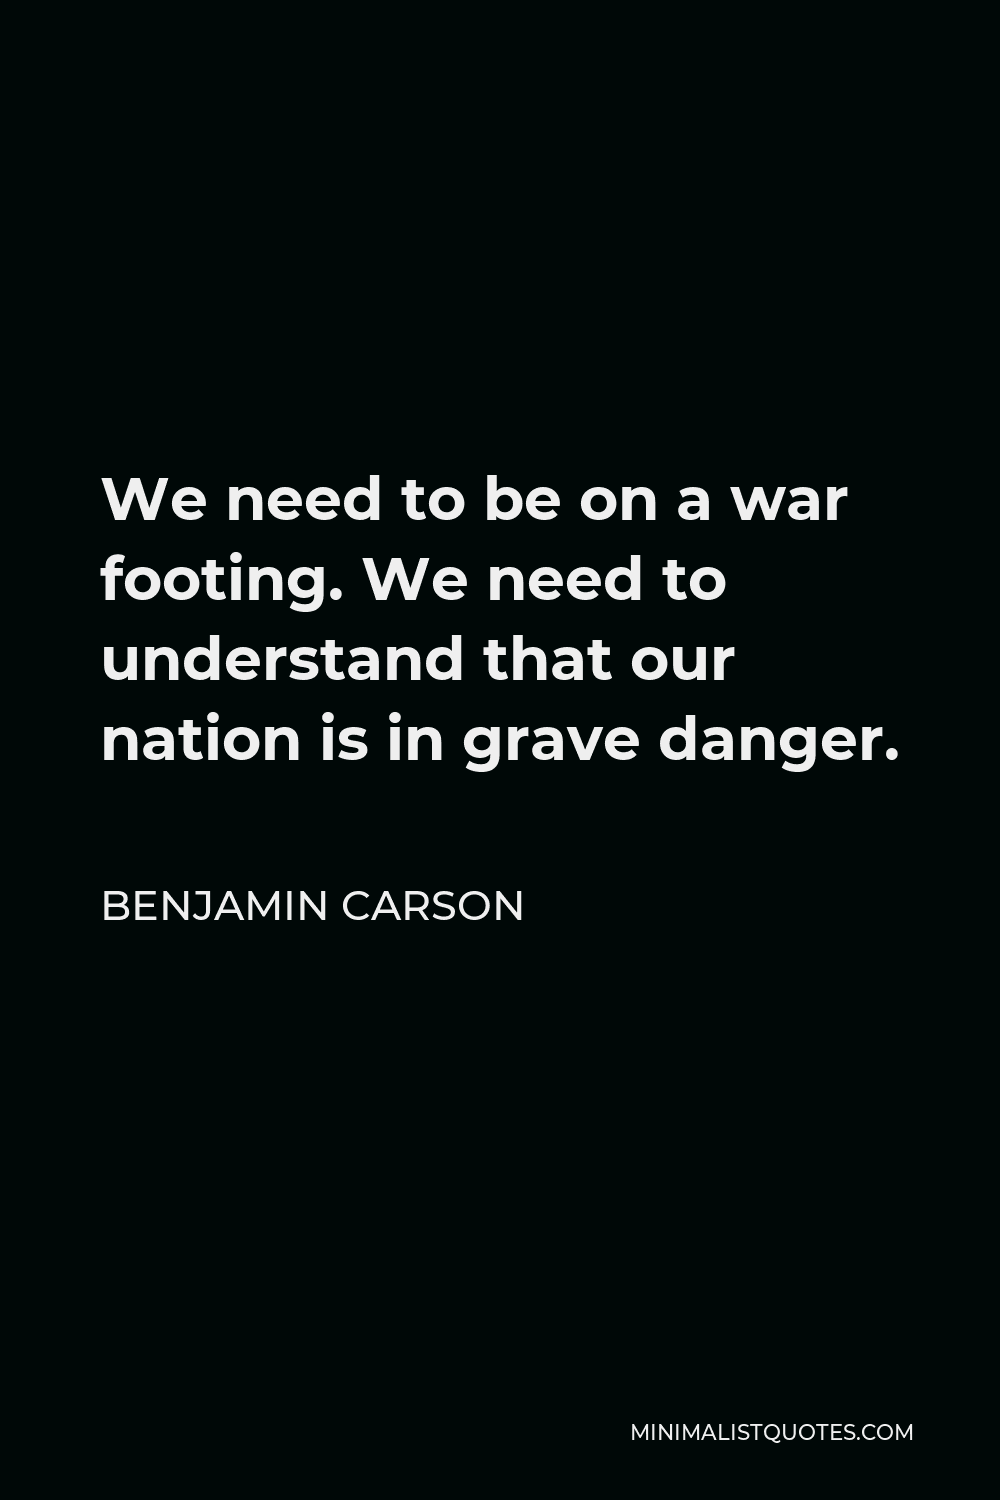 Benjamin Carson Quote - We need to be on a war footing. We need to understand that our nation is in grave danger.